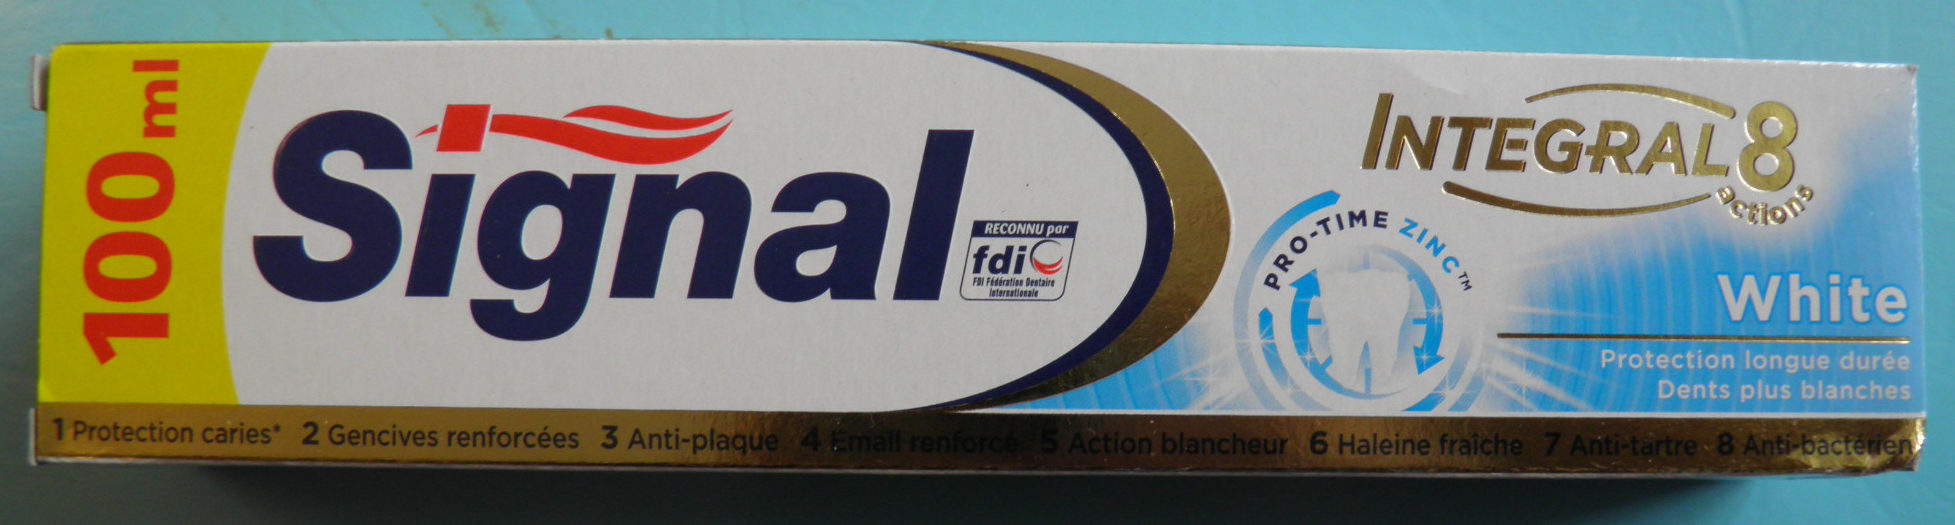 Signal Dentifrice Blancheur White Integral 8 - Product - fr